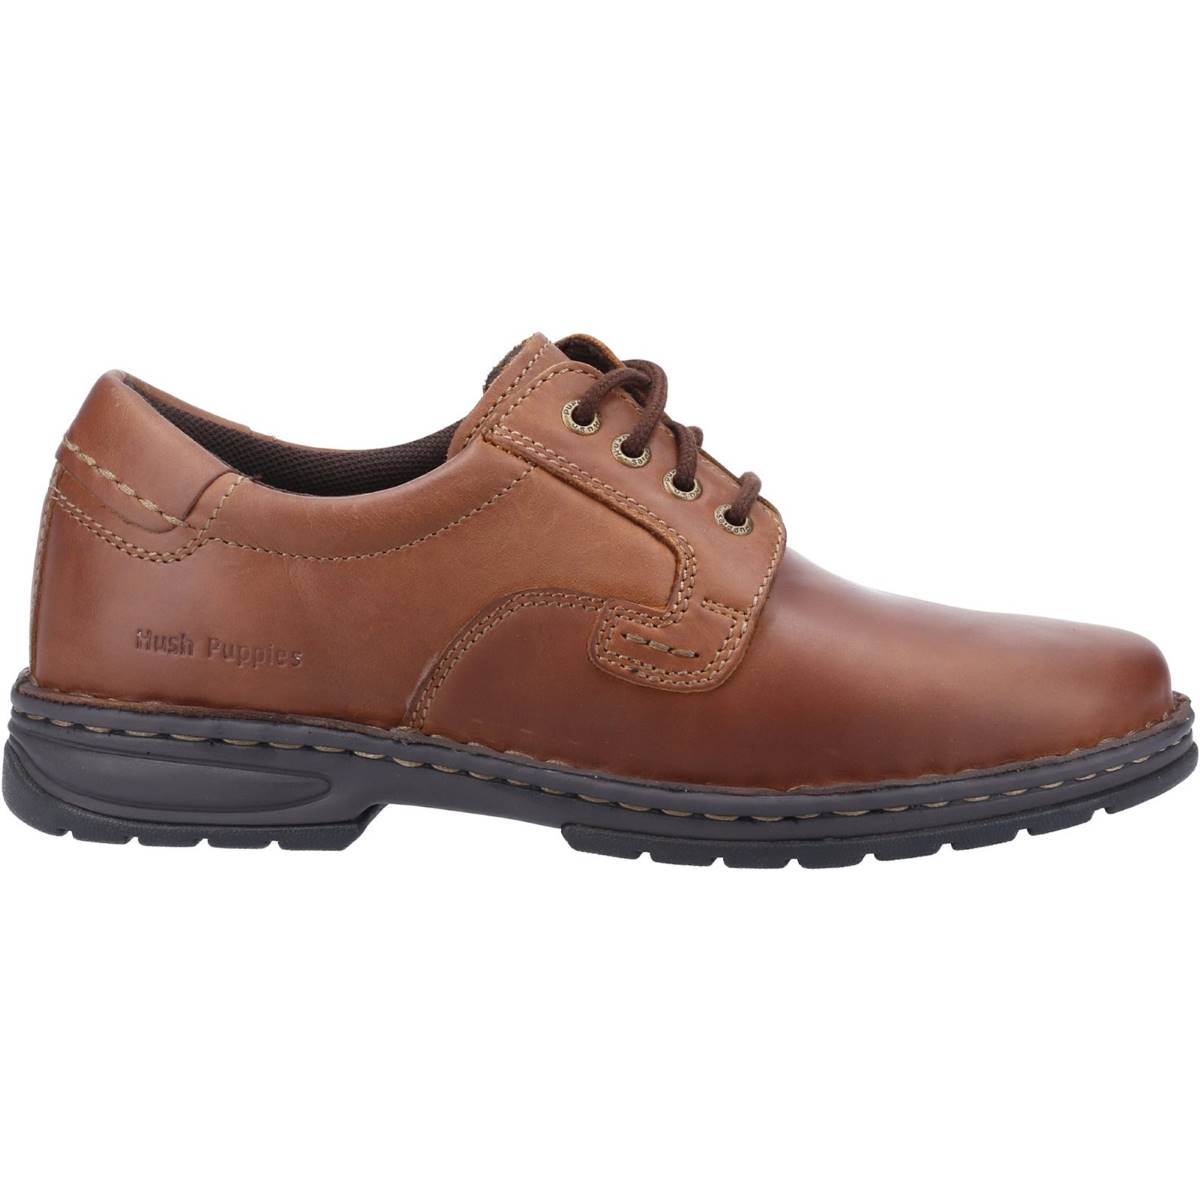 Hush Puppies Outlaw Ii Brown Mens comfort shoes HPM2000-61-2